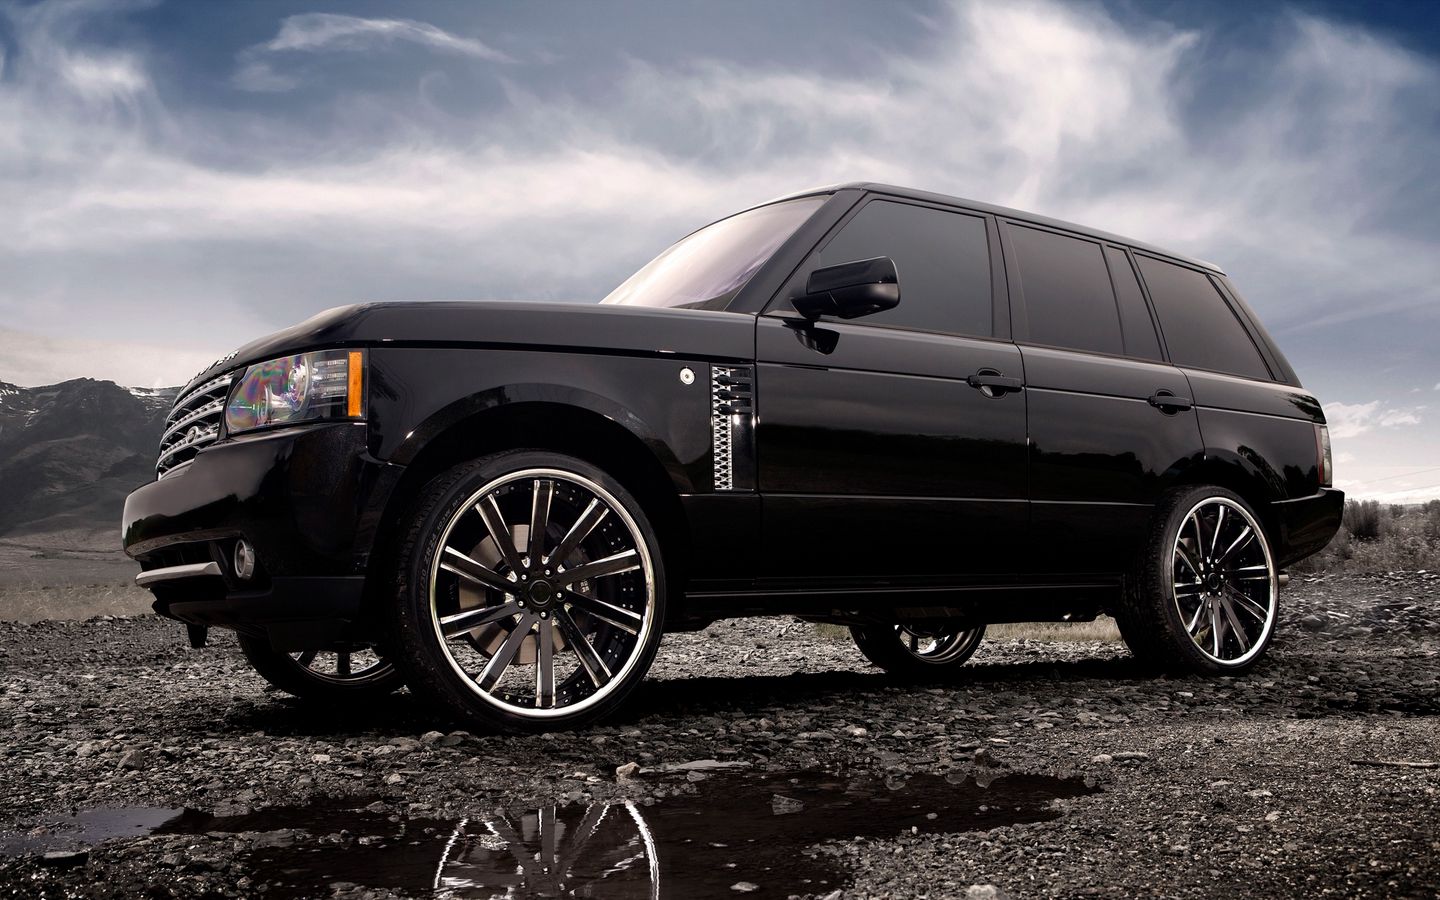 Download wallpaper 1440x900 range rover, land rover, auto, wheels, tuning,  clouds widescreen 16:10 hd background